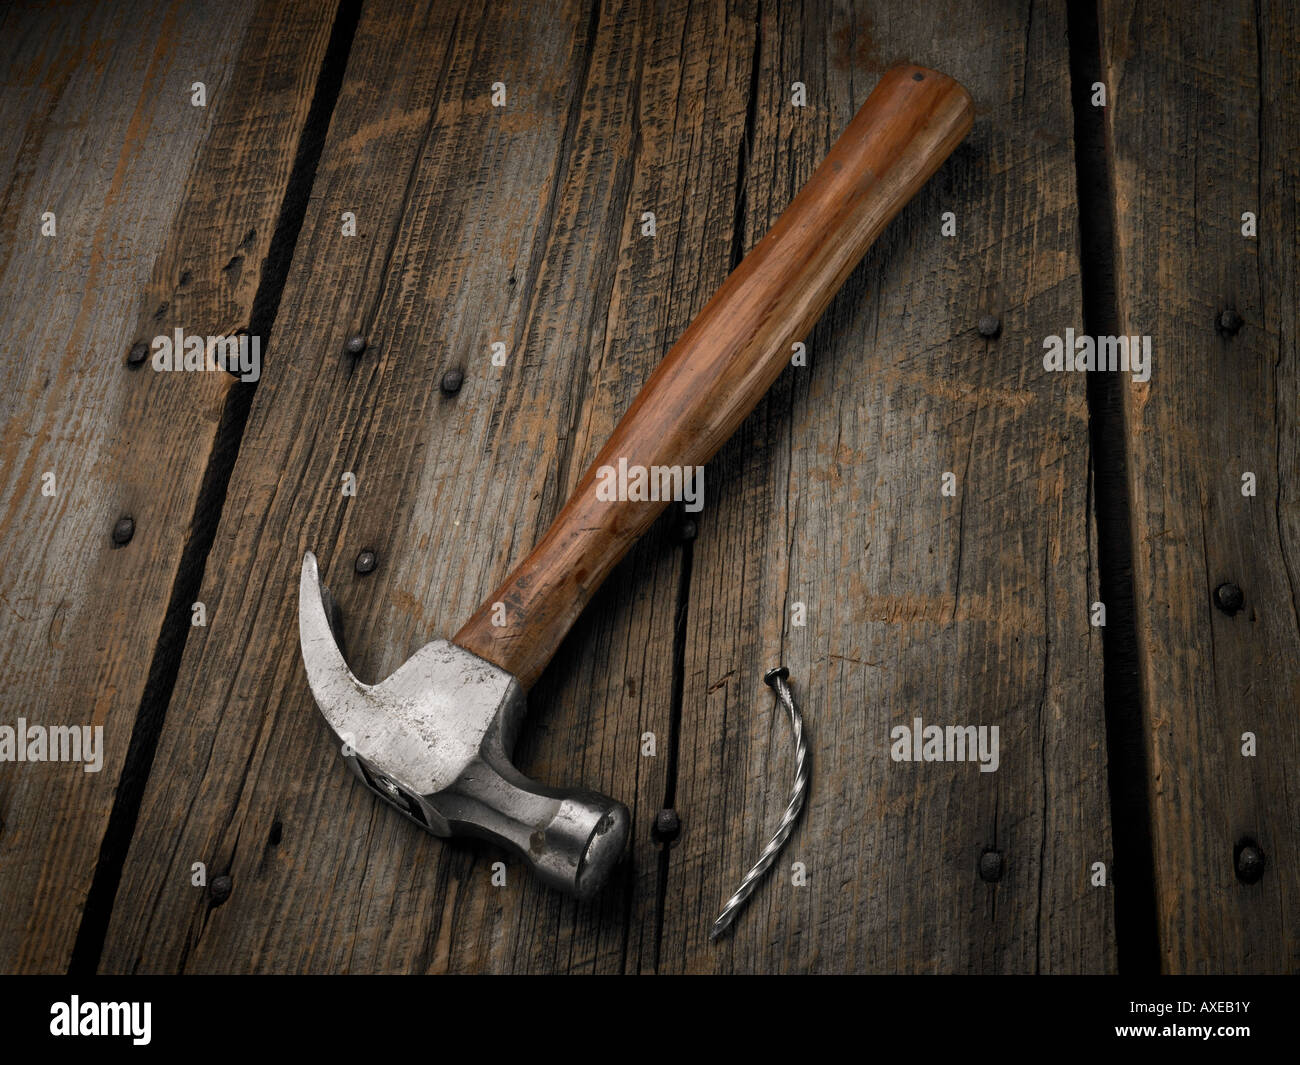 Hammer and bent nail shot on a rustic barn board surface Stock Photo - Alamy